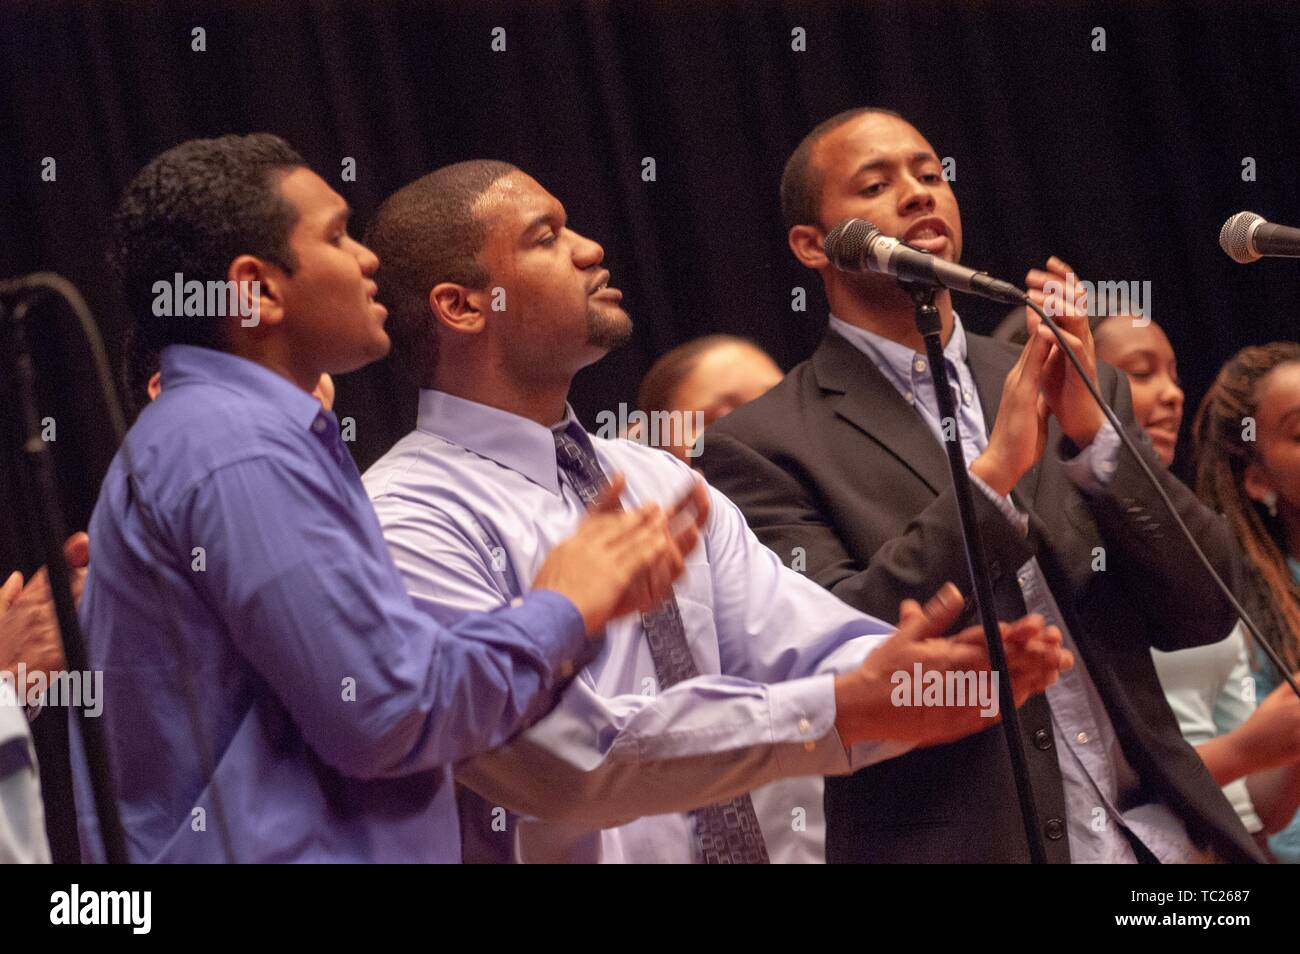 Close-up of three Johns Hopkins University Gospel Choir singers, from the waist up, performing during an event, February 11, 2006. From the Homewood Photography collection. () Stock Photo